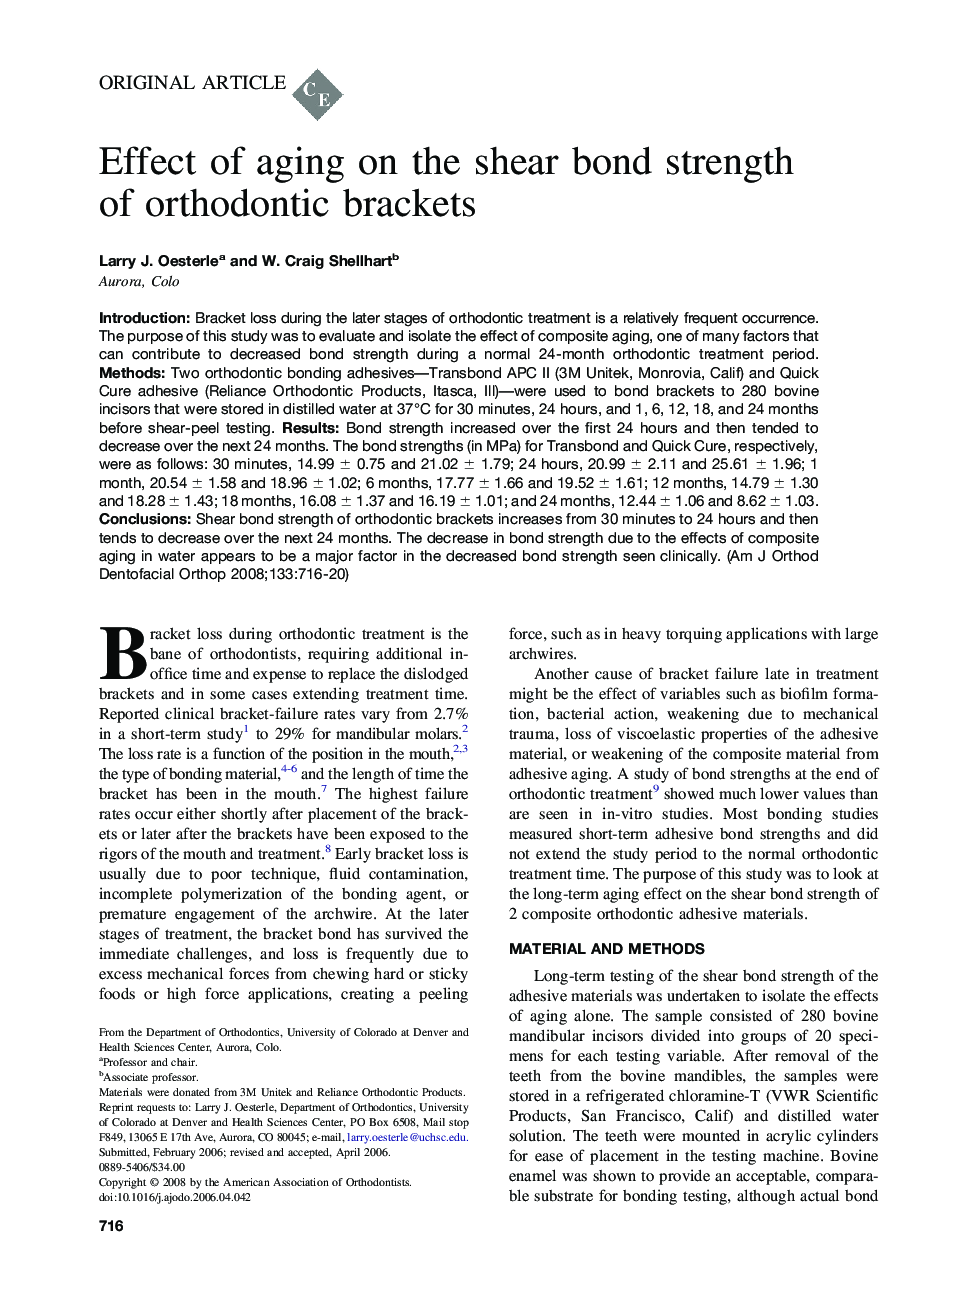 Effect of aging on the shear bond strength of orthodontic brackets 